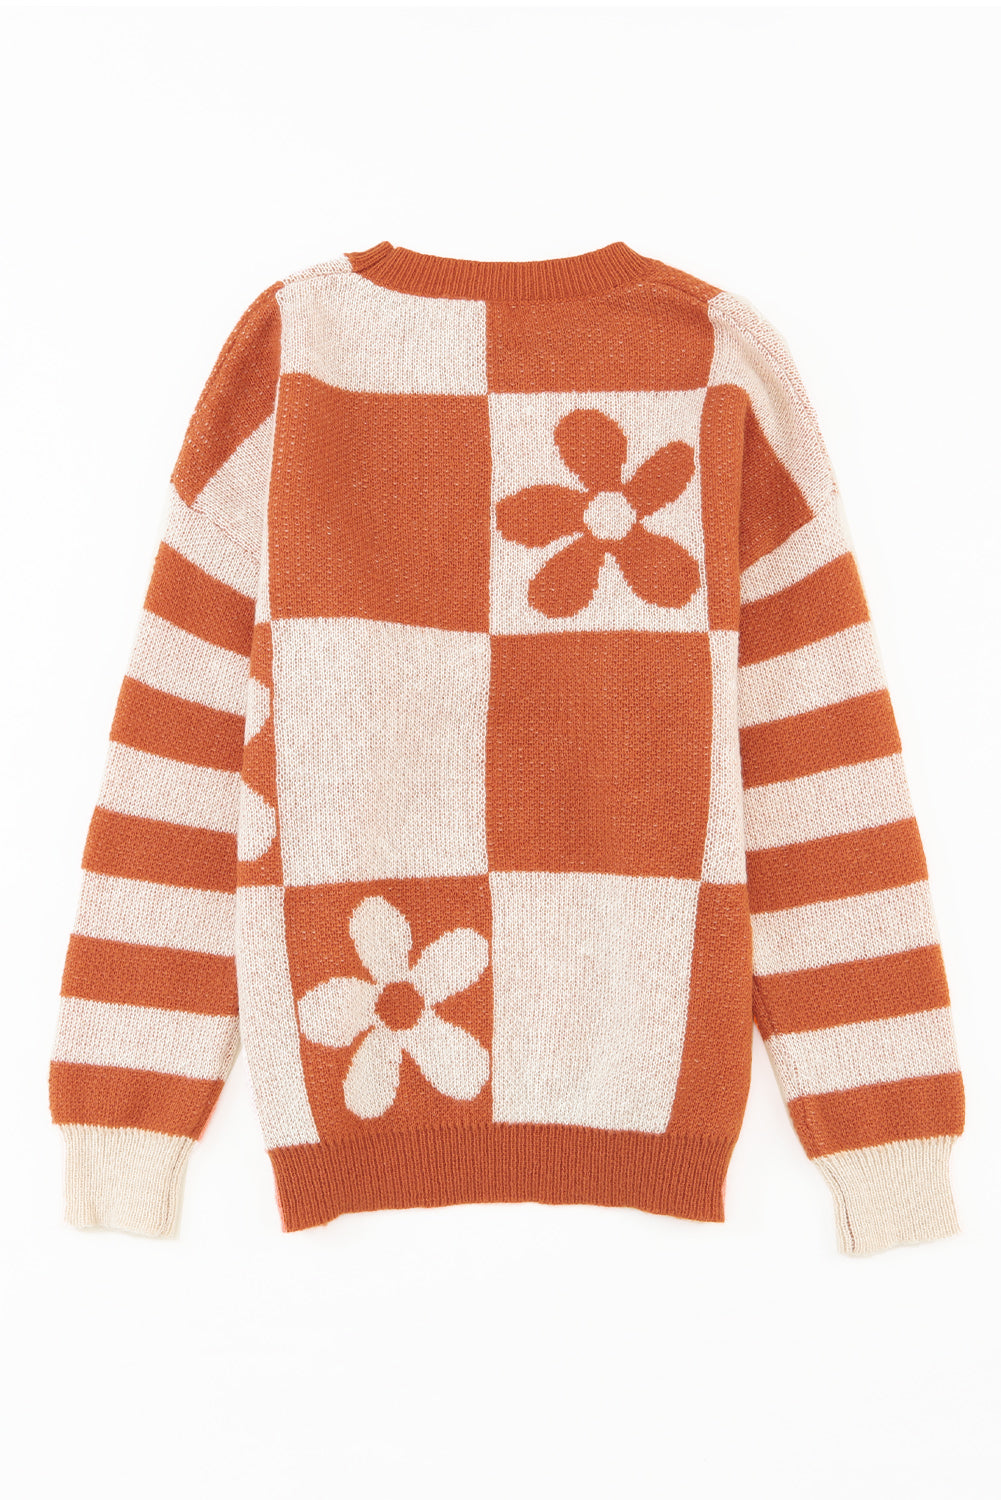 Cali Chic Women Brown Checkered Floral Print Striped Sleeve Sweater